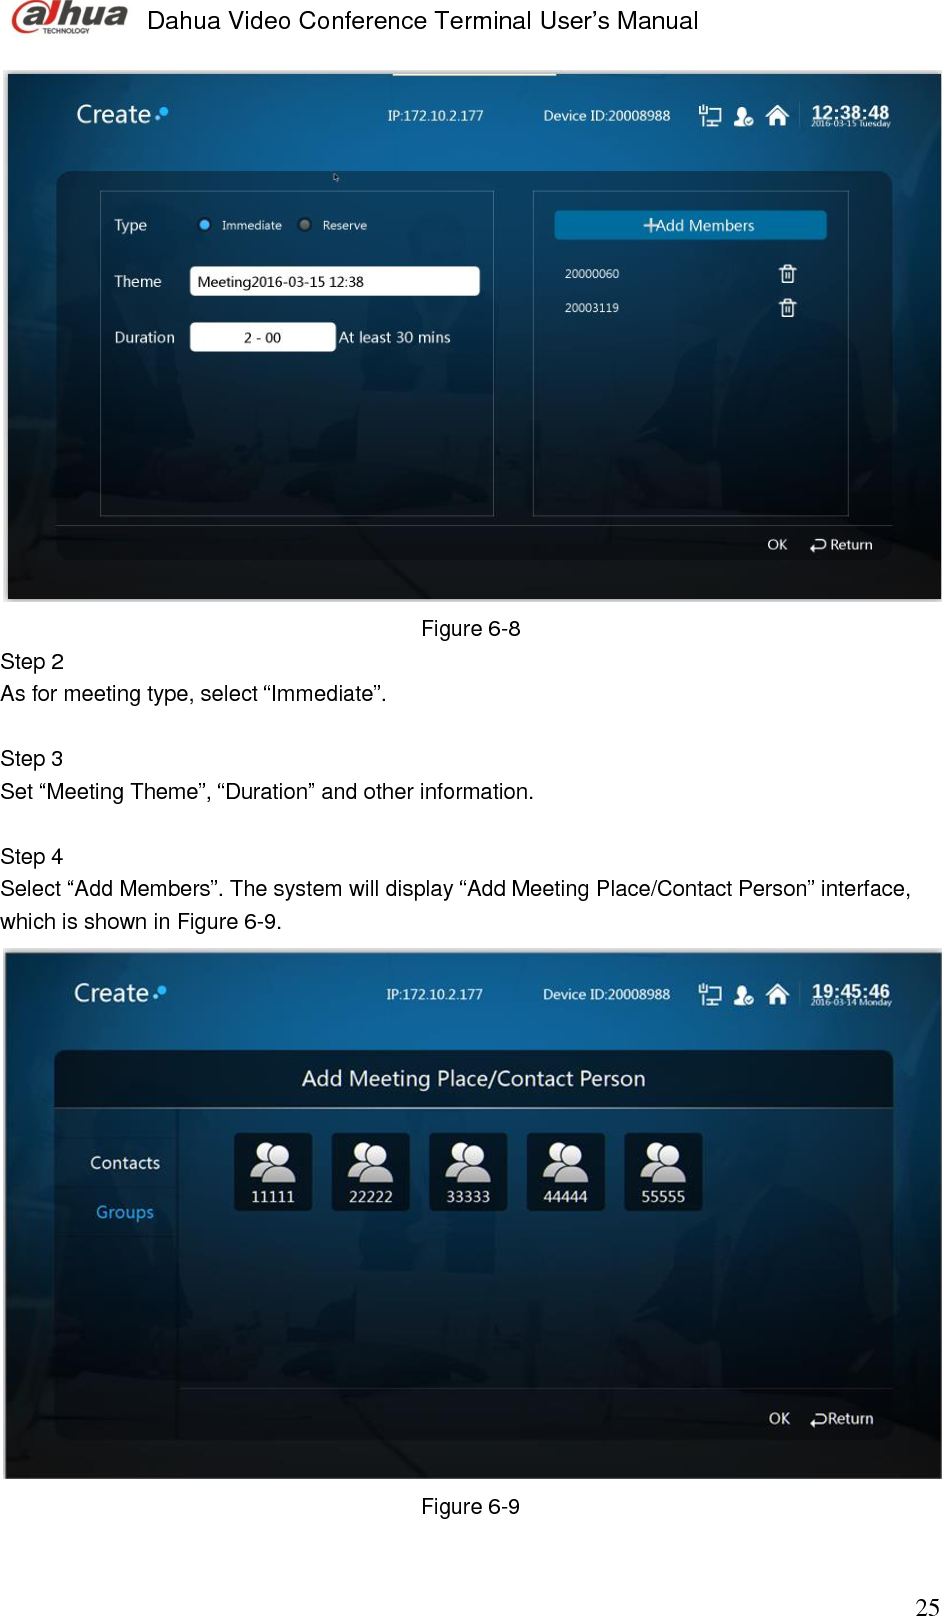  Dahua Video Conference Terminal User’s Manual                                                                              25  Figure 6-8 Step 2  As for meeting type, select “Immediate”.   Step 3  Set “Meeting Theme”, “Duration” and other information.   Step 4  Select “Add Members”. The system will display “Add Meeting Place/Contact Person” interface, which is shown in Figure 6-9.   Figure 6-9  